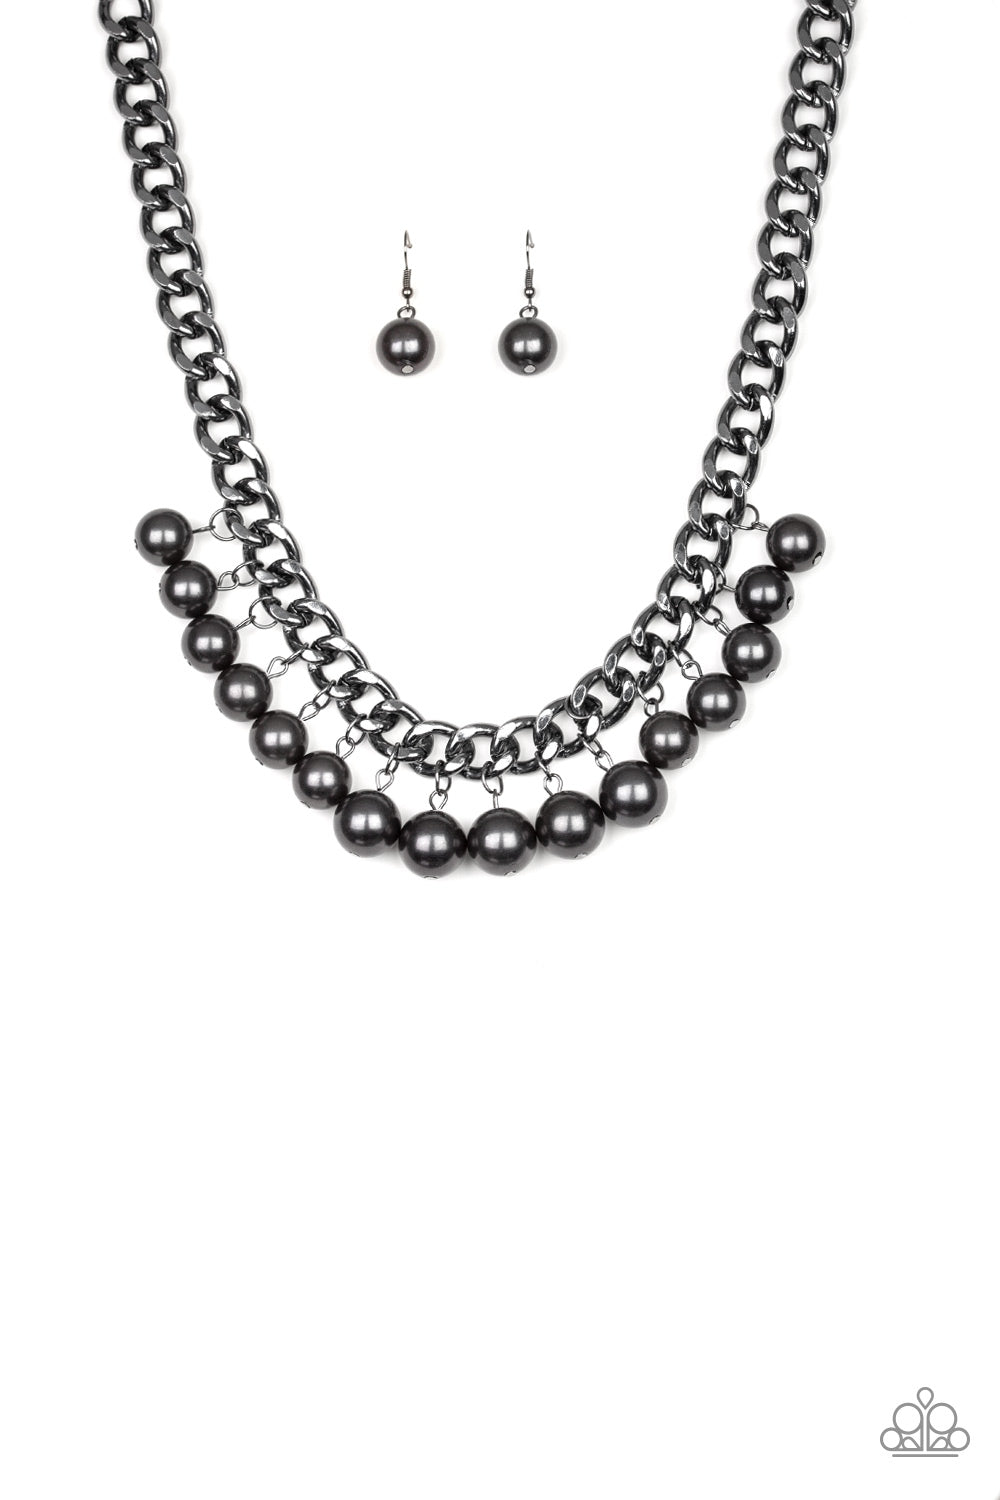 Paparazzi Get Off My Runway - Black Necklace - A Finishing Touch Jewelry